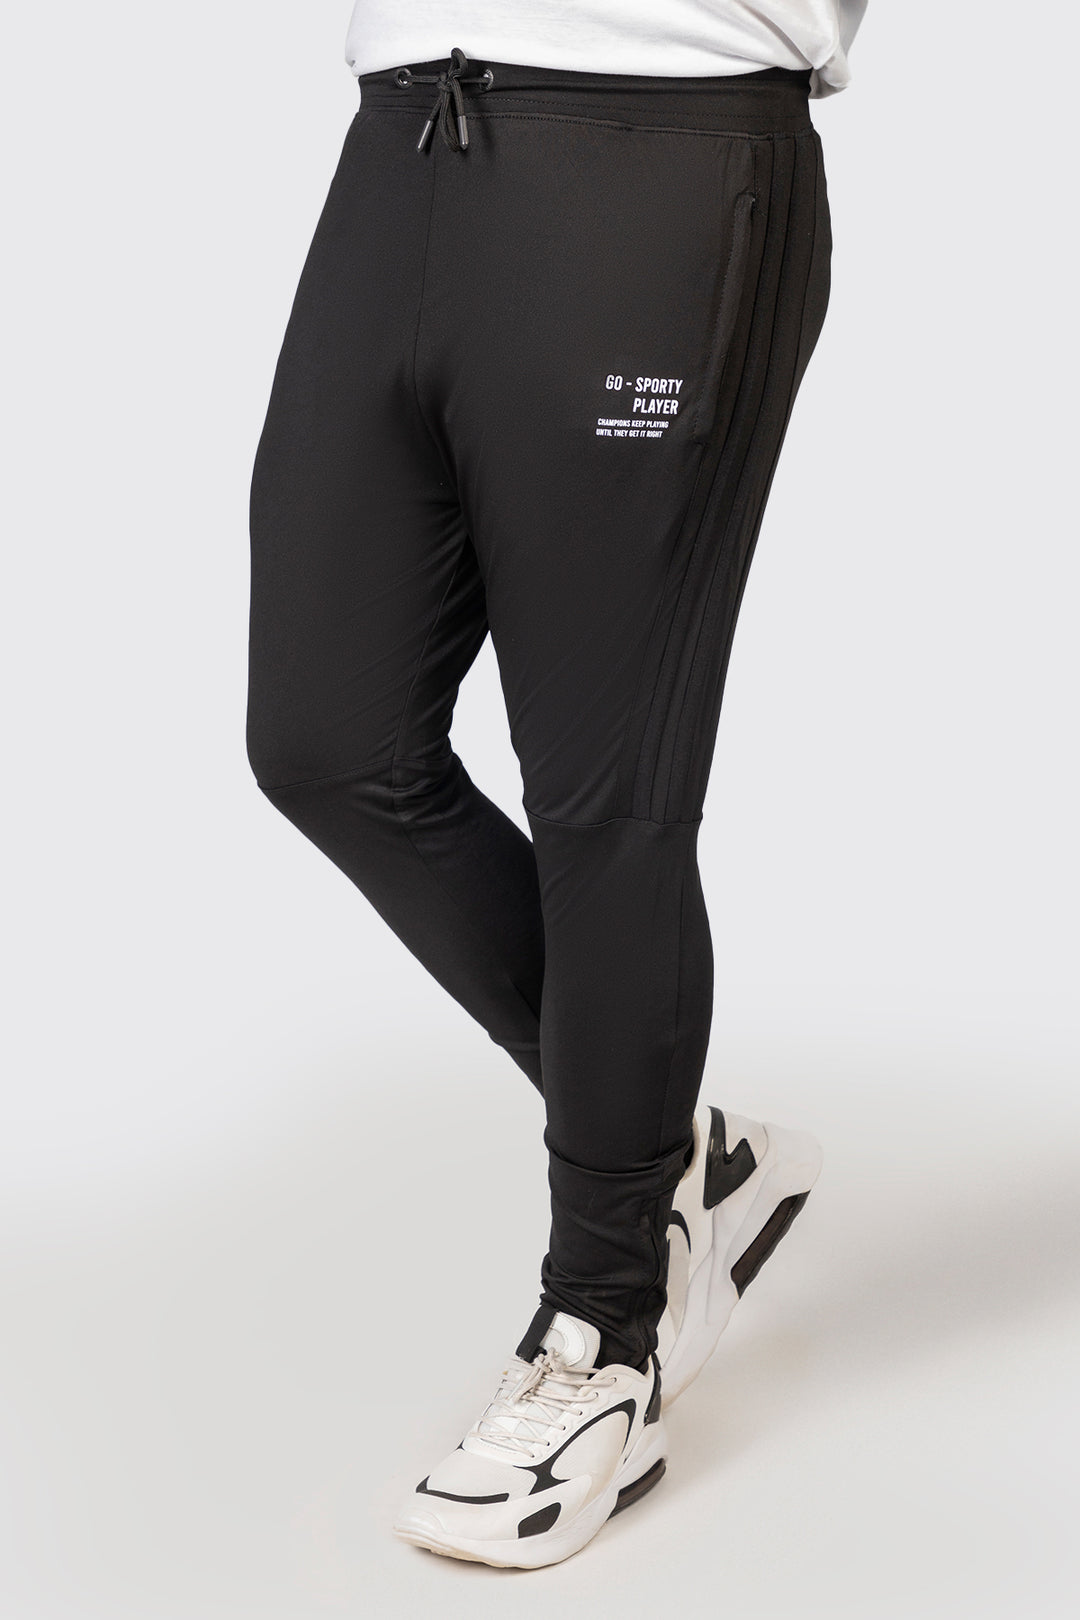 Go-Sporty Black Polyester Trousers (Plus Size) - W23 - MTR099P